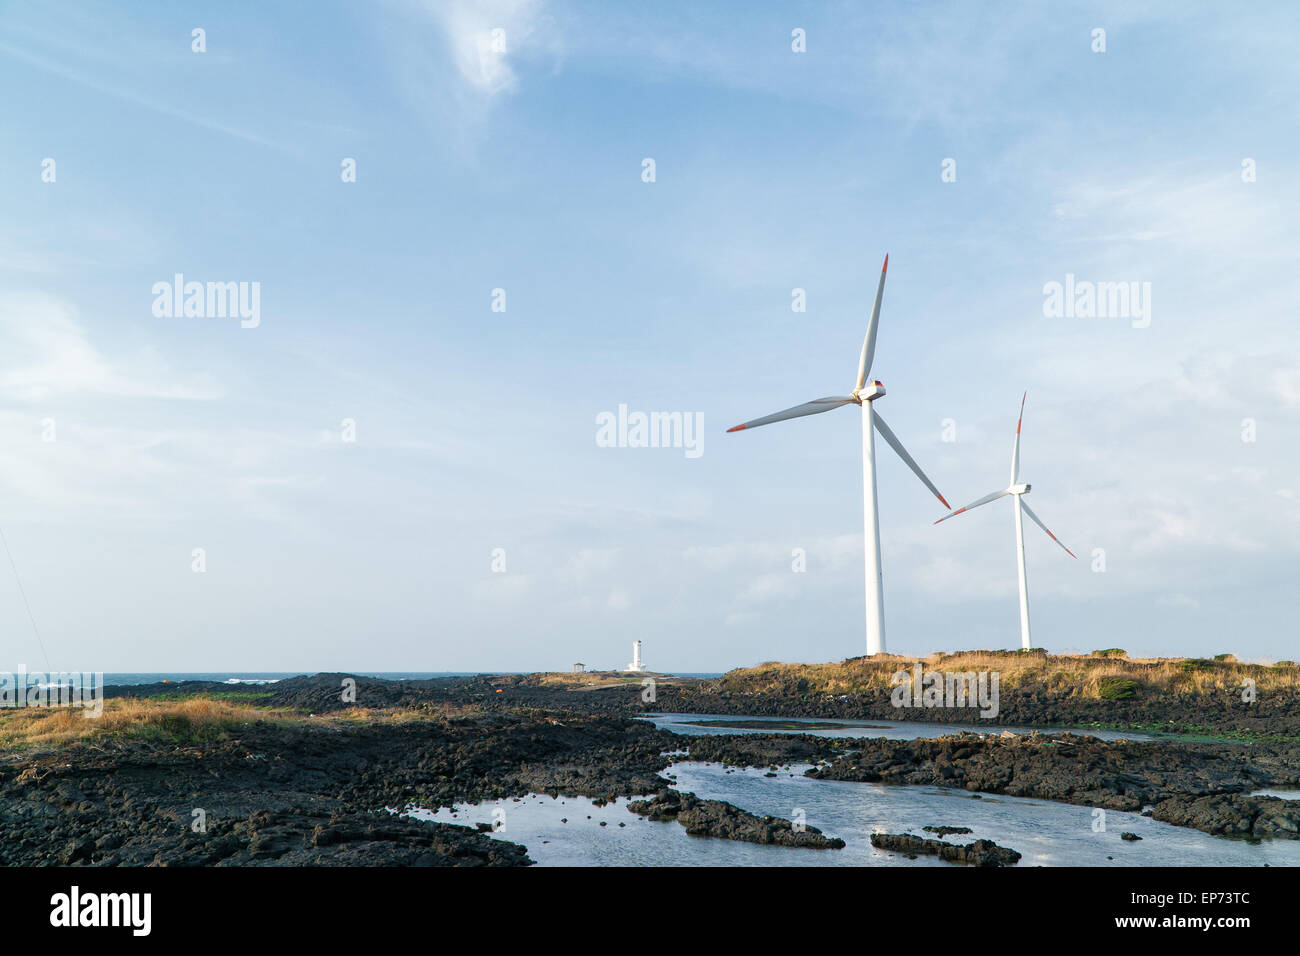 https://c8.alamy.com/comp/EP73TC/cloudy-evening-landscape-with-two-windgenerator-at-a-coast-in-jeju-EP73TC.jpg